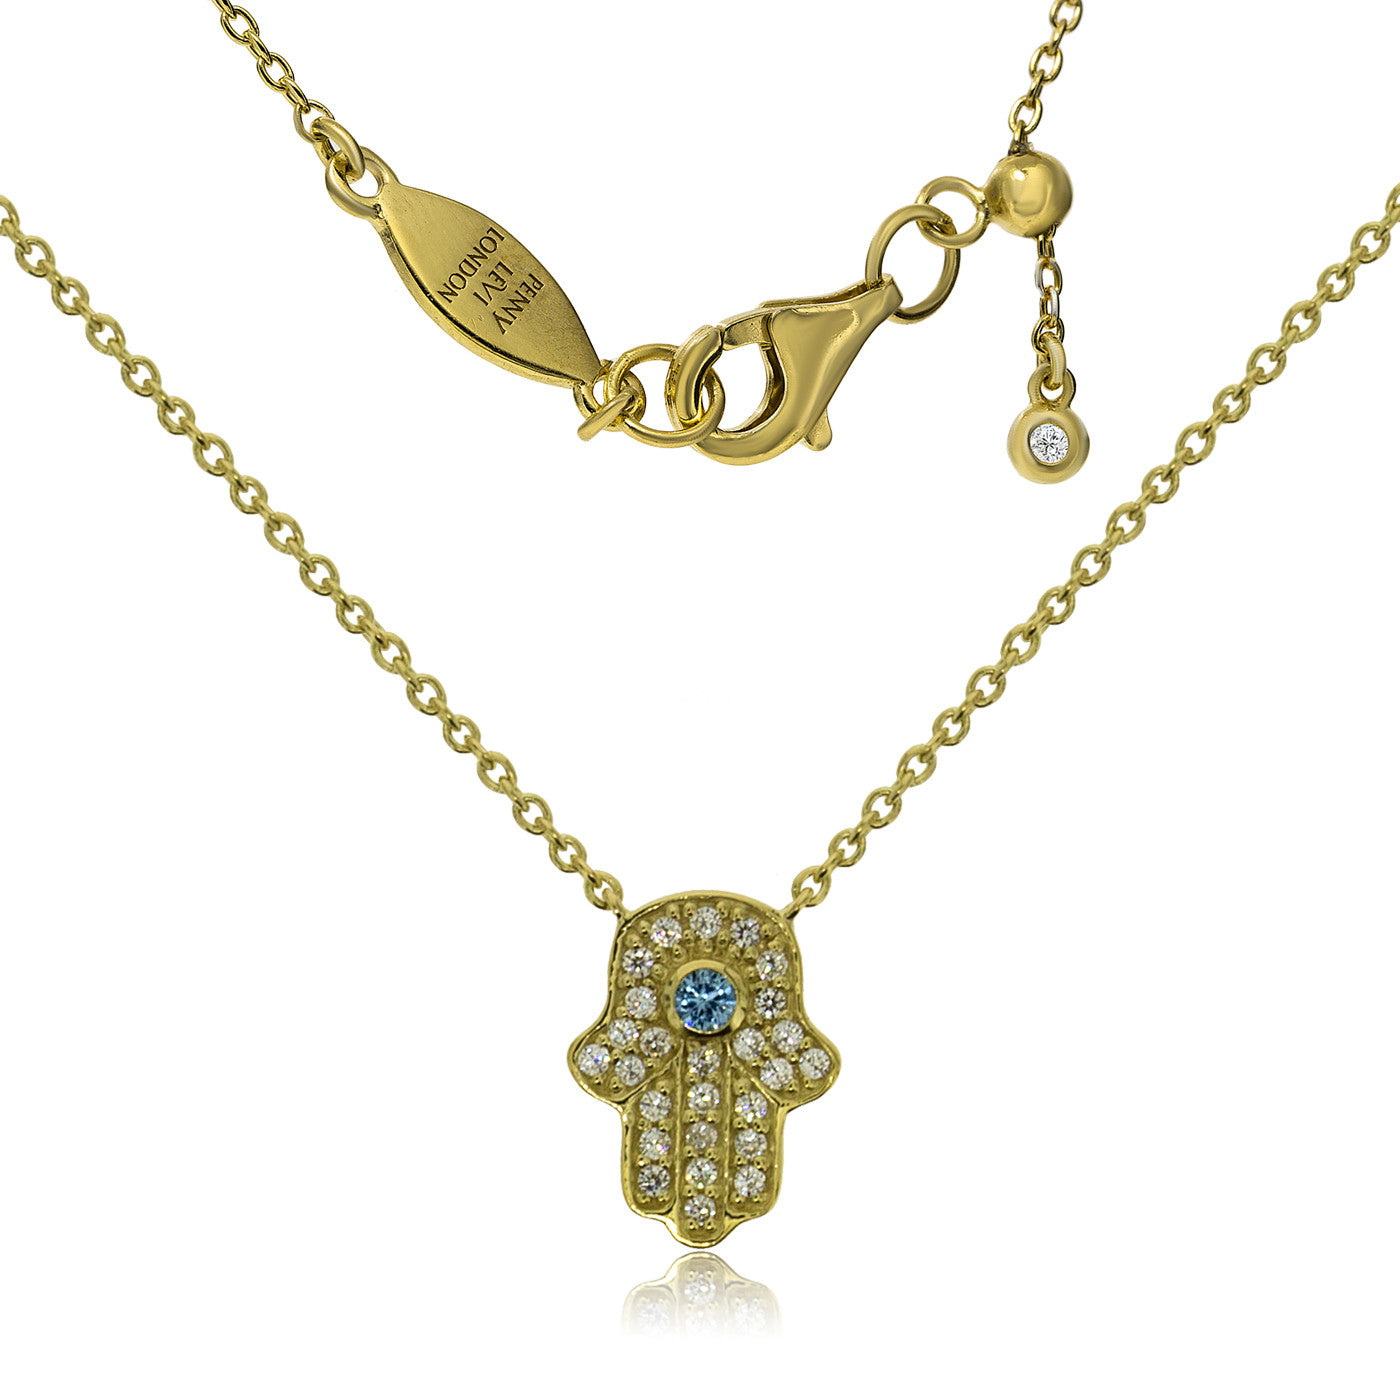 NT-201/G - Hamsa (hand) and Chain Necklace. Adjustable Length